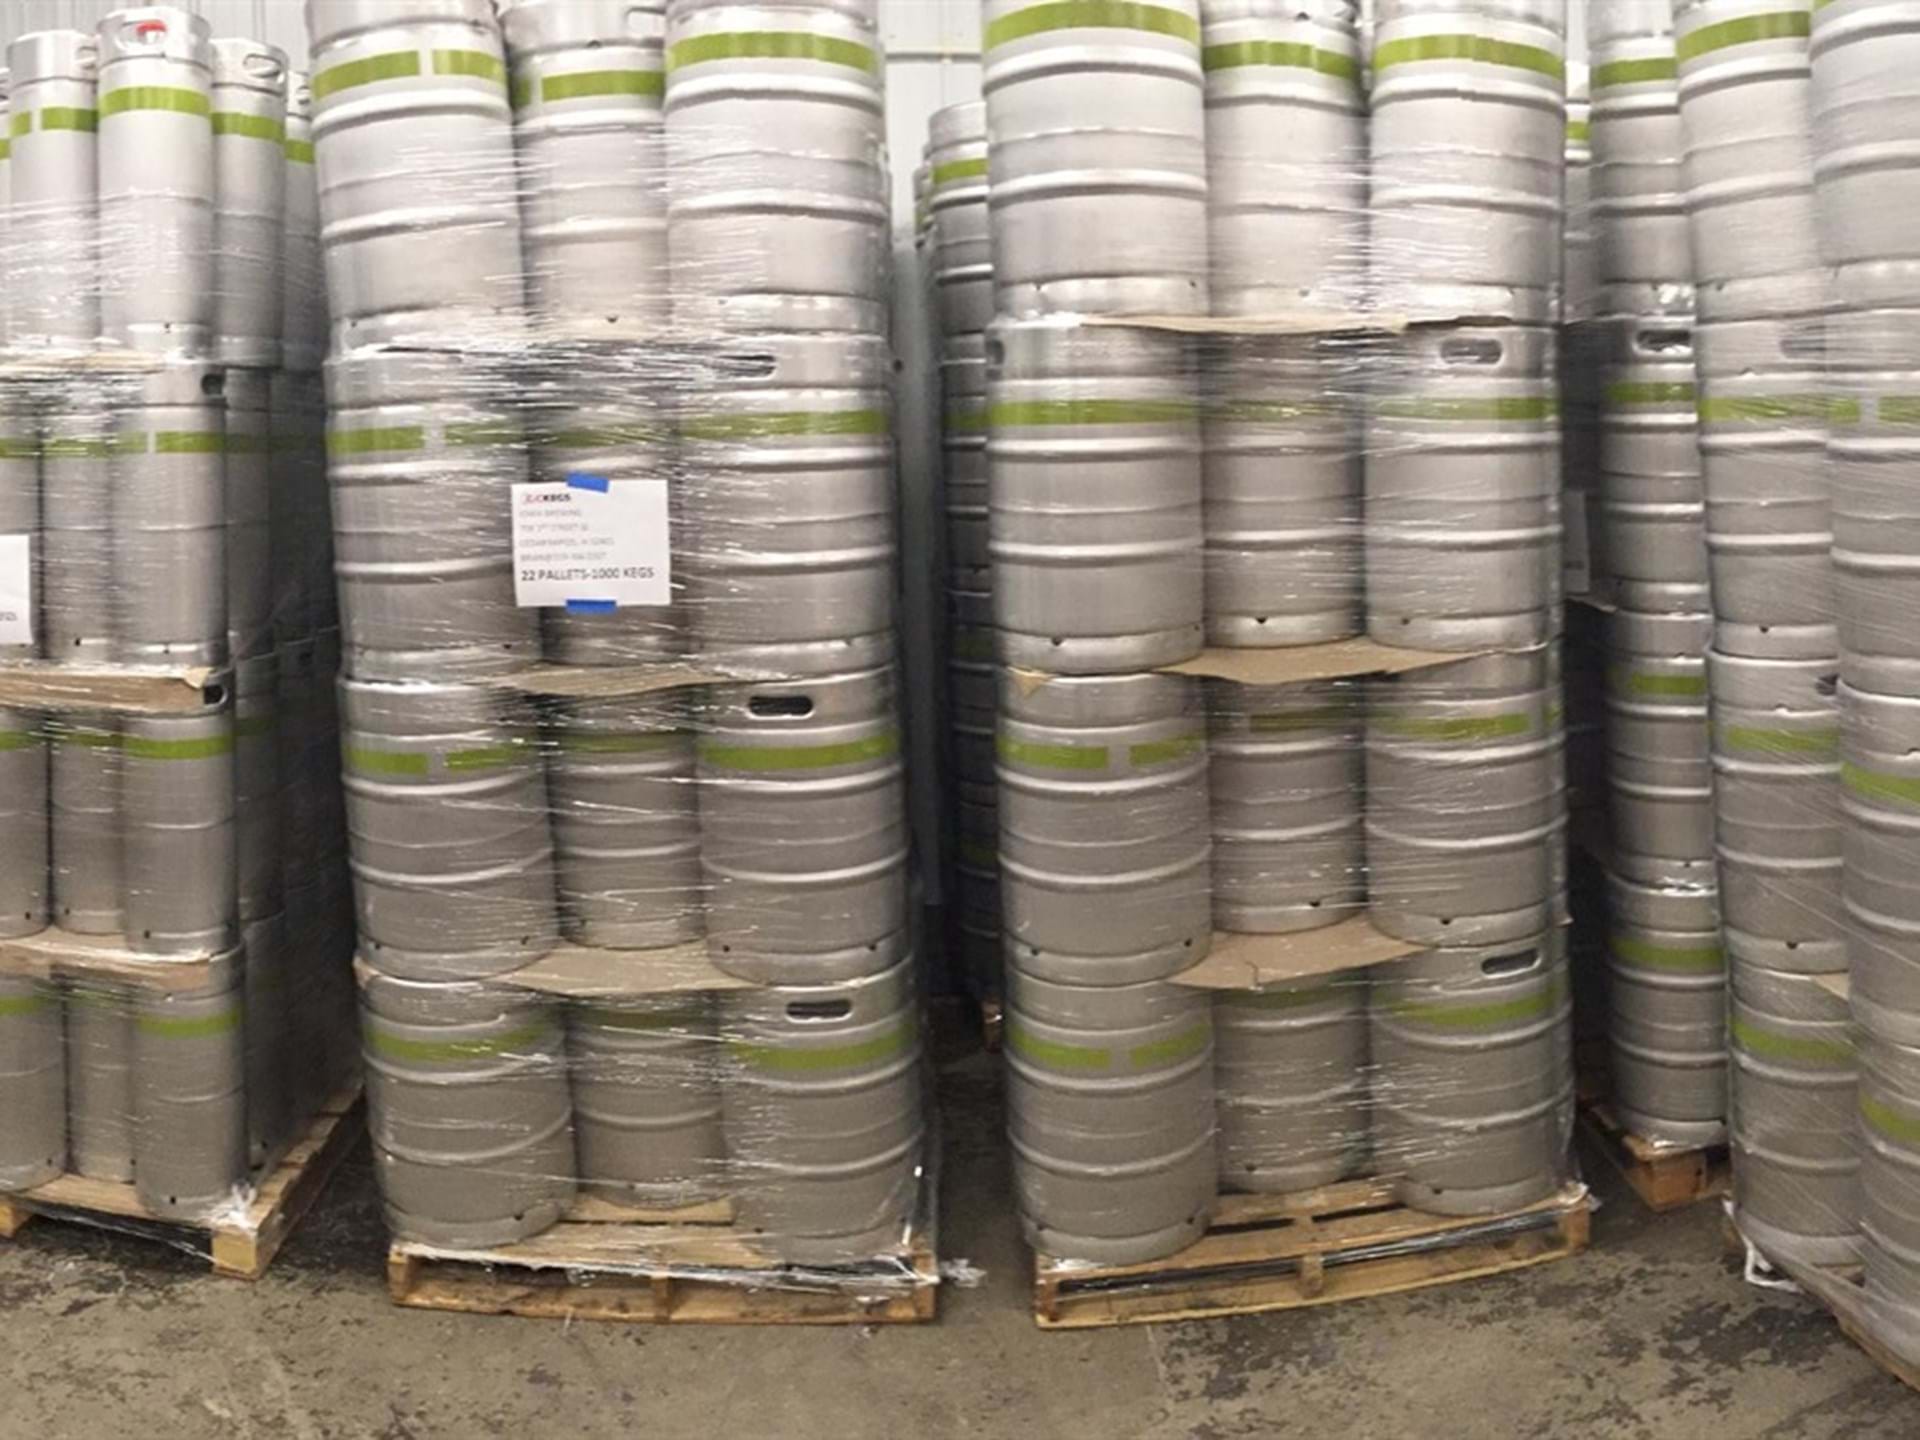 Stacks of empty kegs ready to be filled